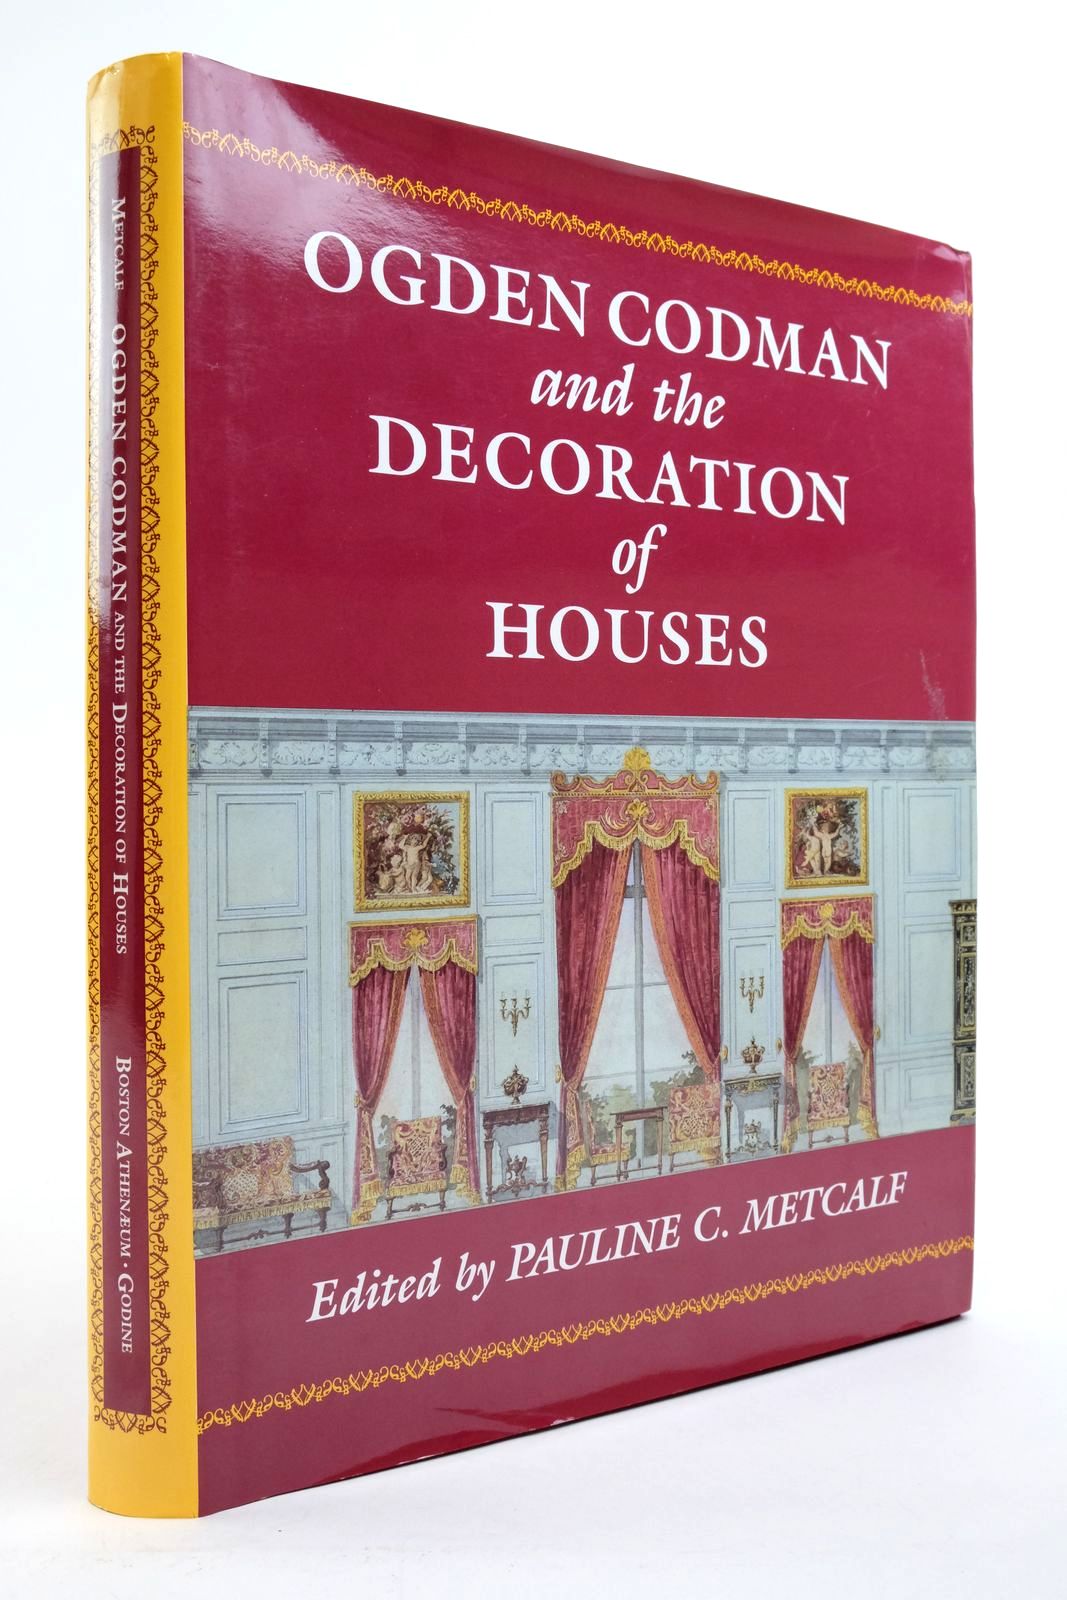 Photo of OGDEN CODMAN AND THE DECORATION OF HOUSES written by Metcalf, Pauline C. published by David R. Godine (STOCK CODE: 2138916)  for sale by Stella & Rose's Books